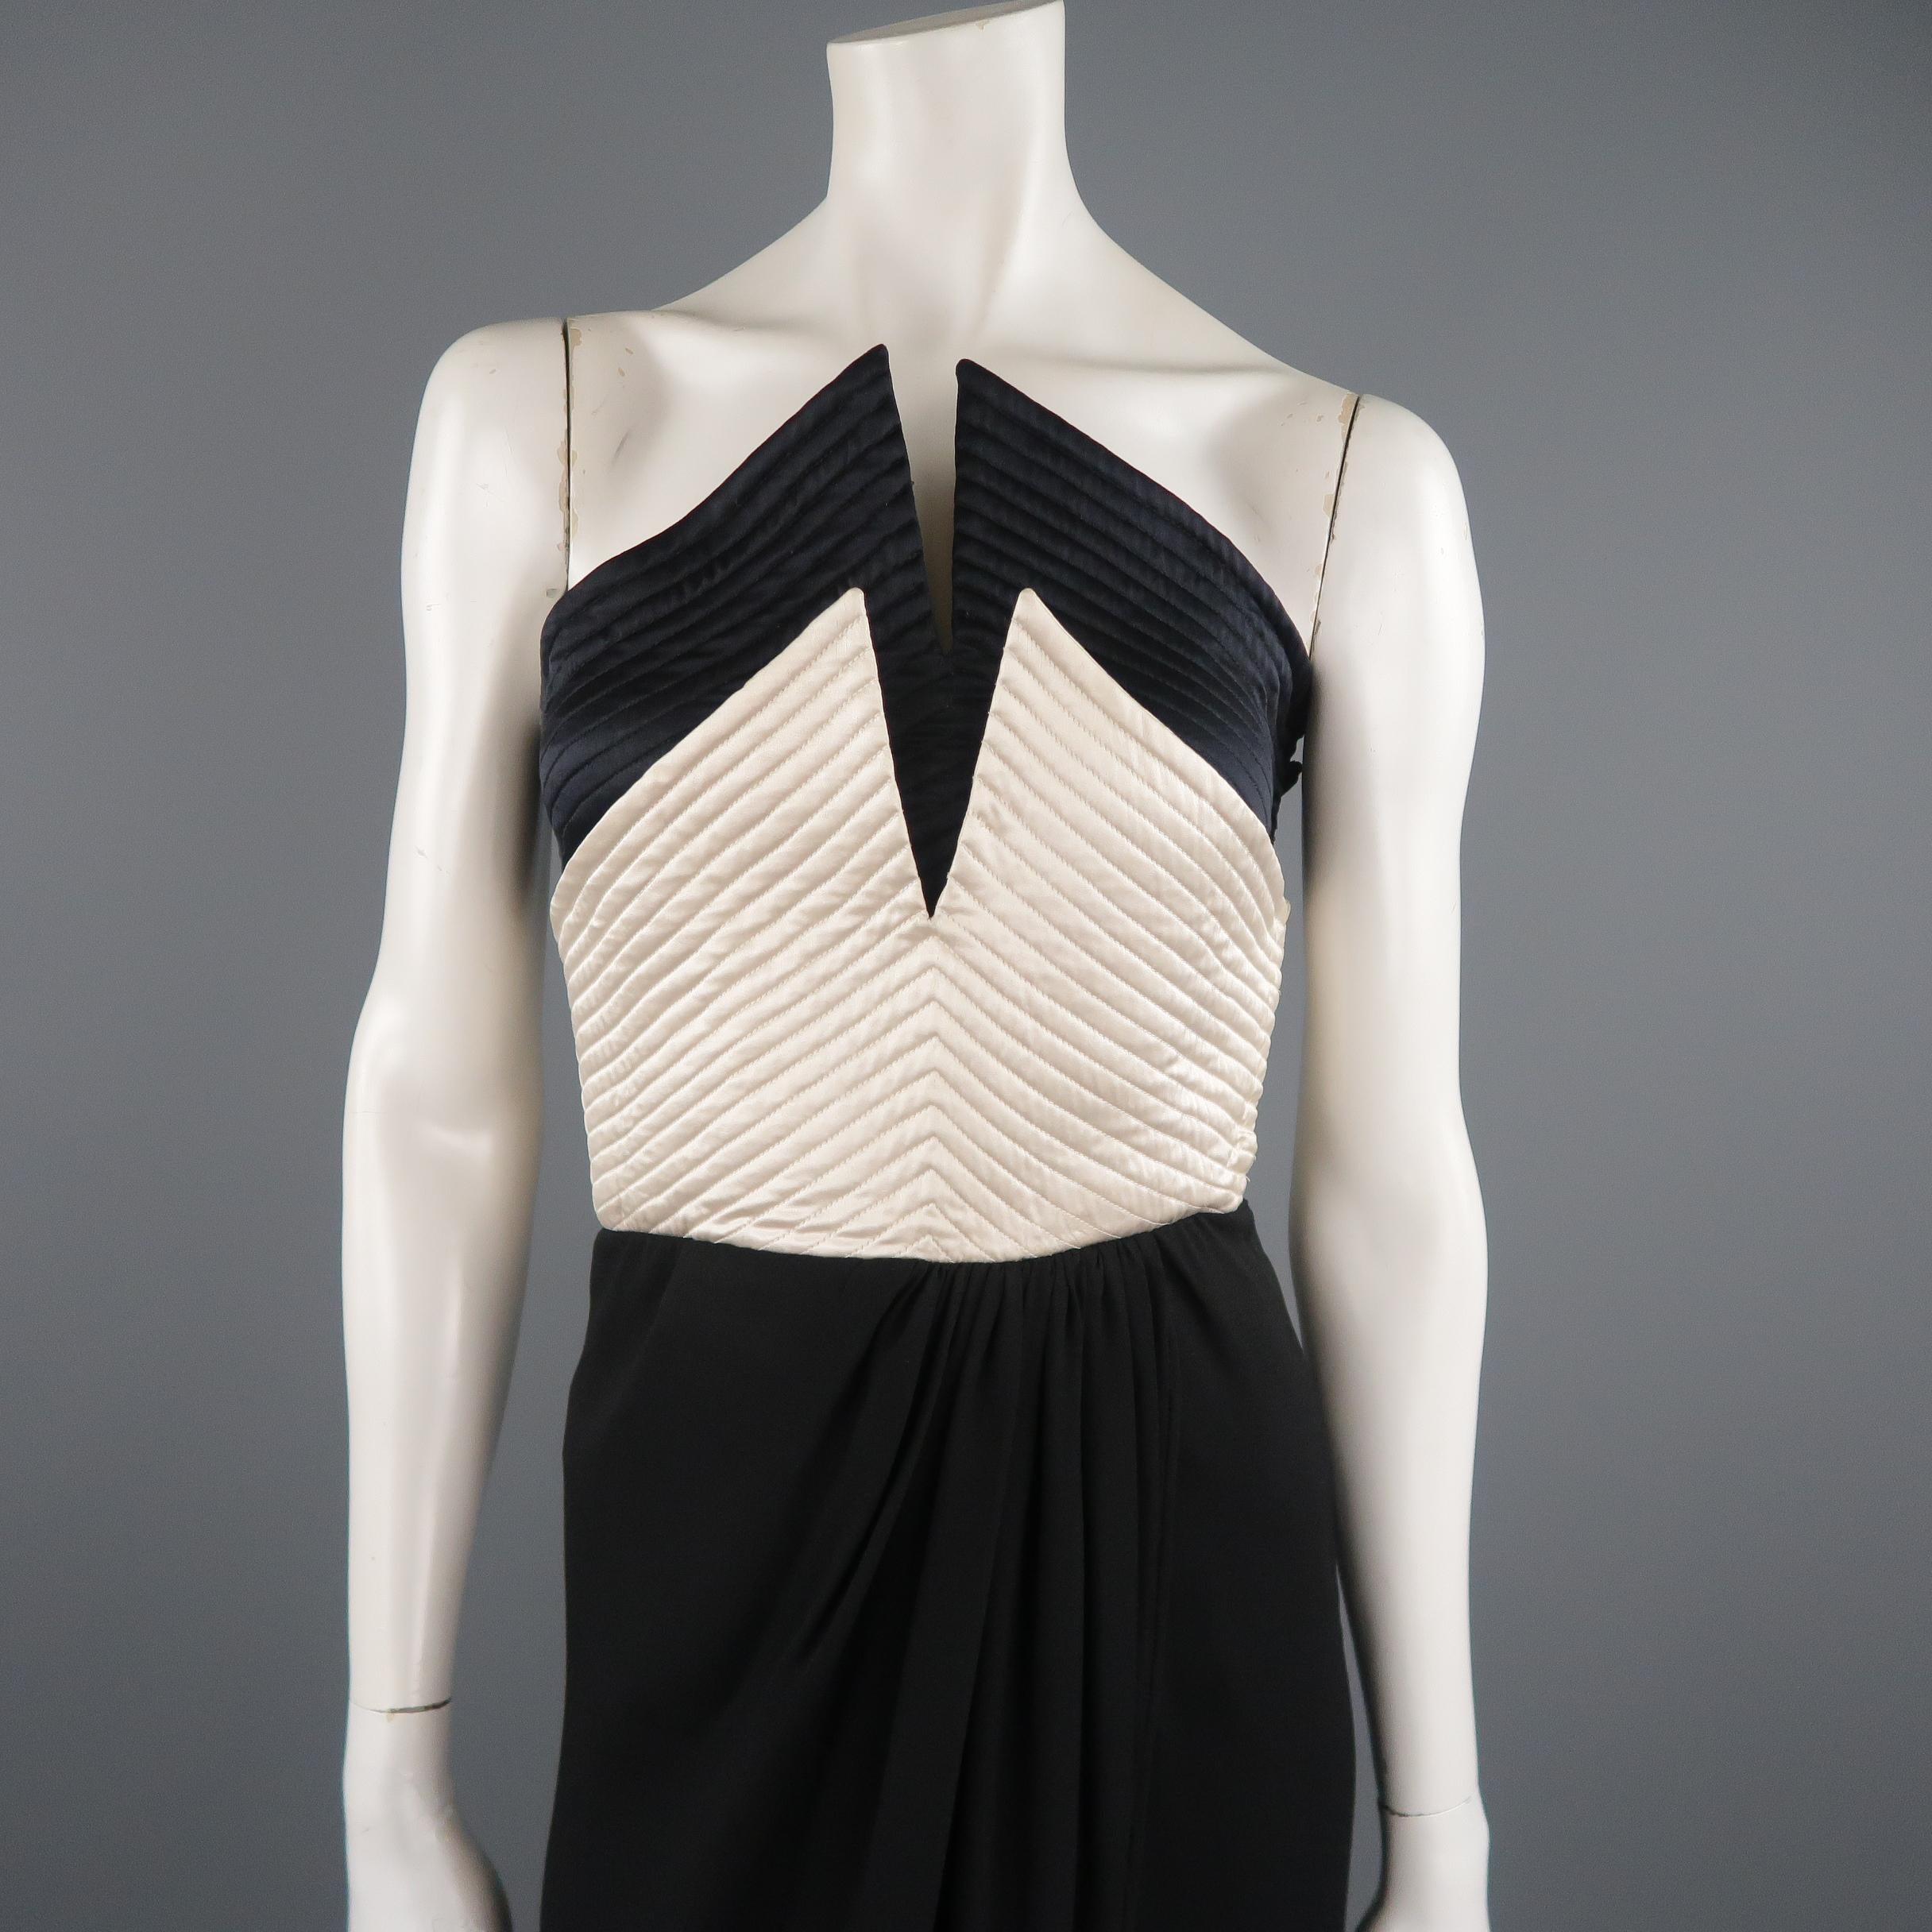 This fabulous vintage 1980's VALENTINO cocktail dress features a layered satin quilted point bustier top with crepe wrap skirt. Made in Italy.
 
Very Good Pre-Owned Condition.
Marked: 6
 
Measurements:
 
Bust: 32 in.
Waist: 26 in.
Hip: 38